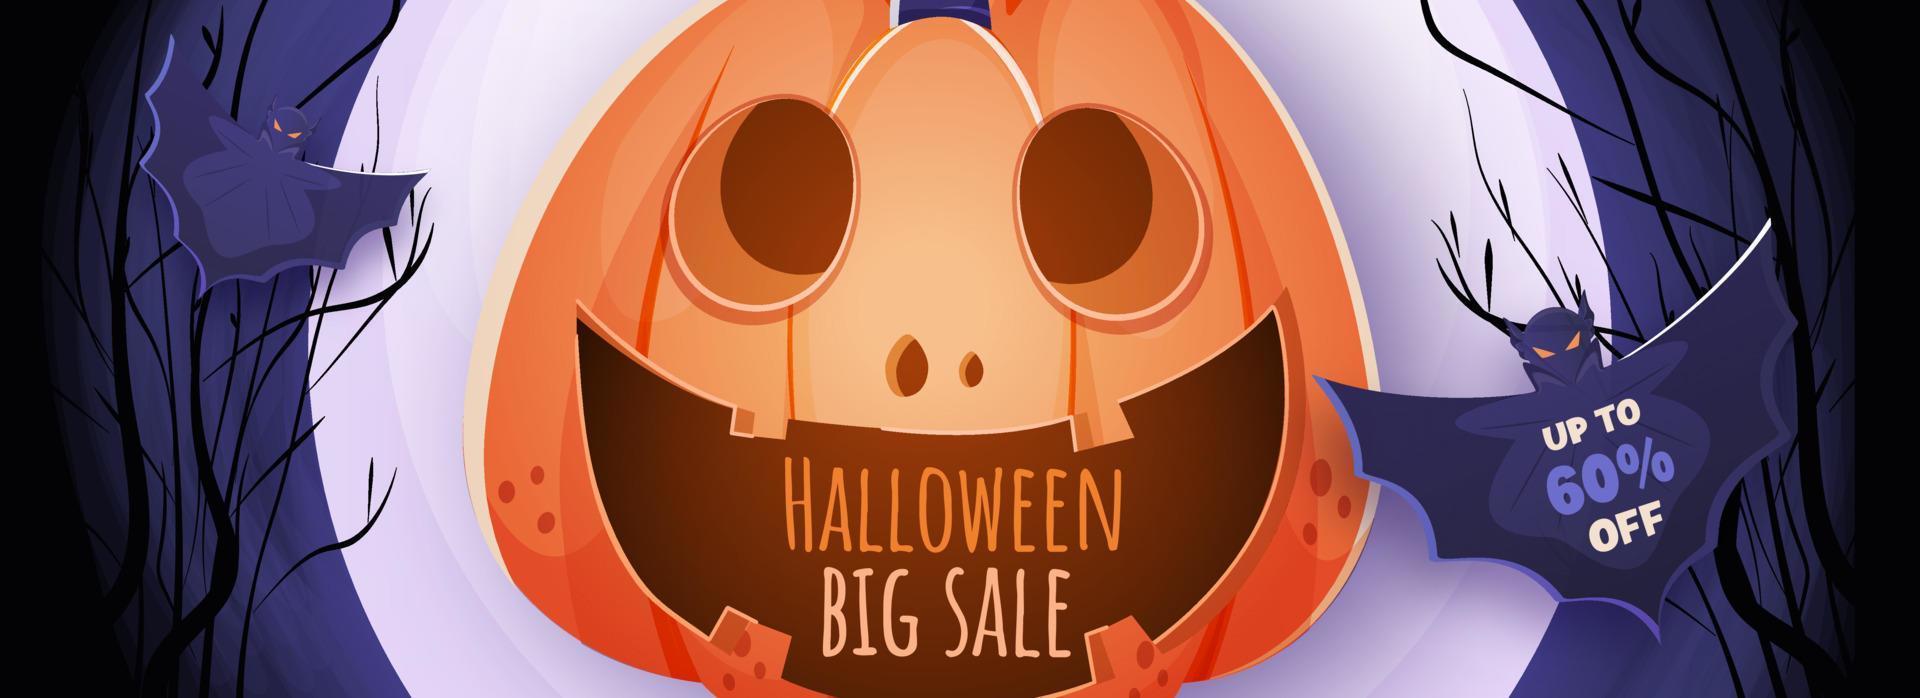 Halloween Big Sale Header or Banner Design with Discount Offer, Spooky Pumpkin and Bats Flying on Full Moon Blue Forest Background. vector